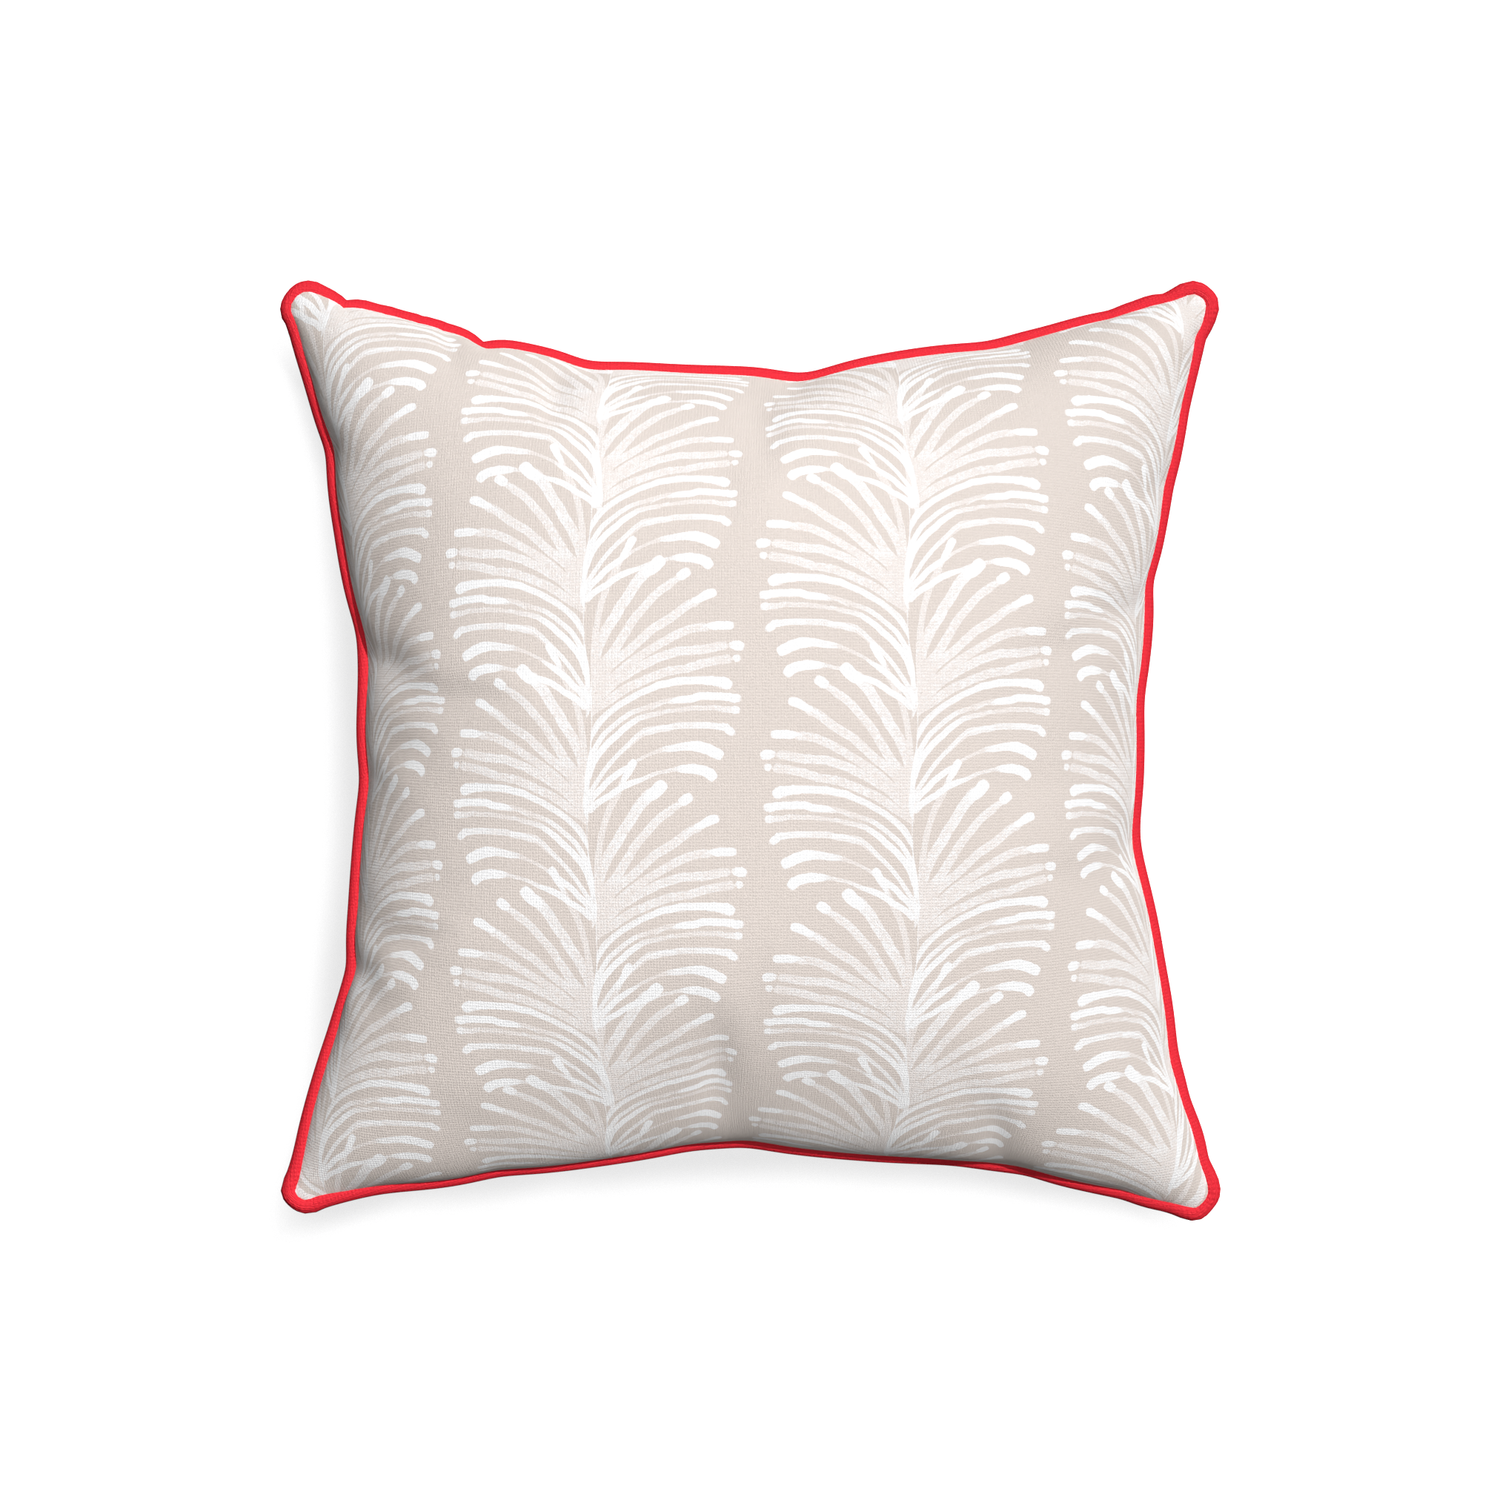 20-square emma sand custom pillow with cherry piping on white background